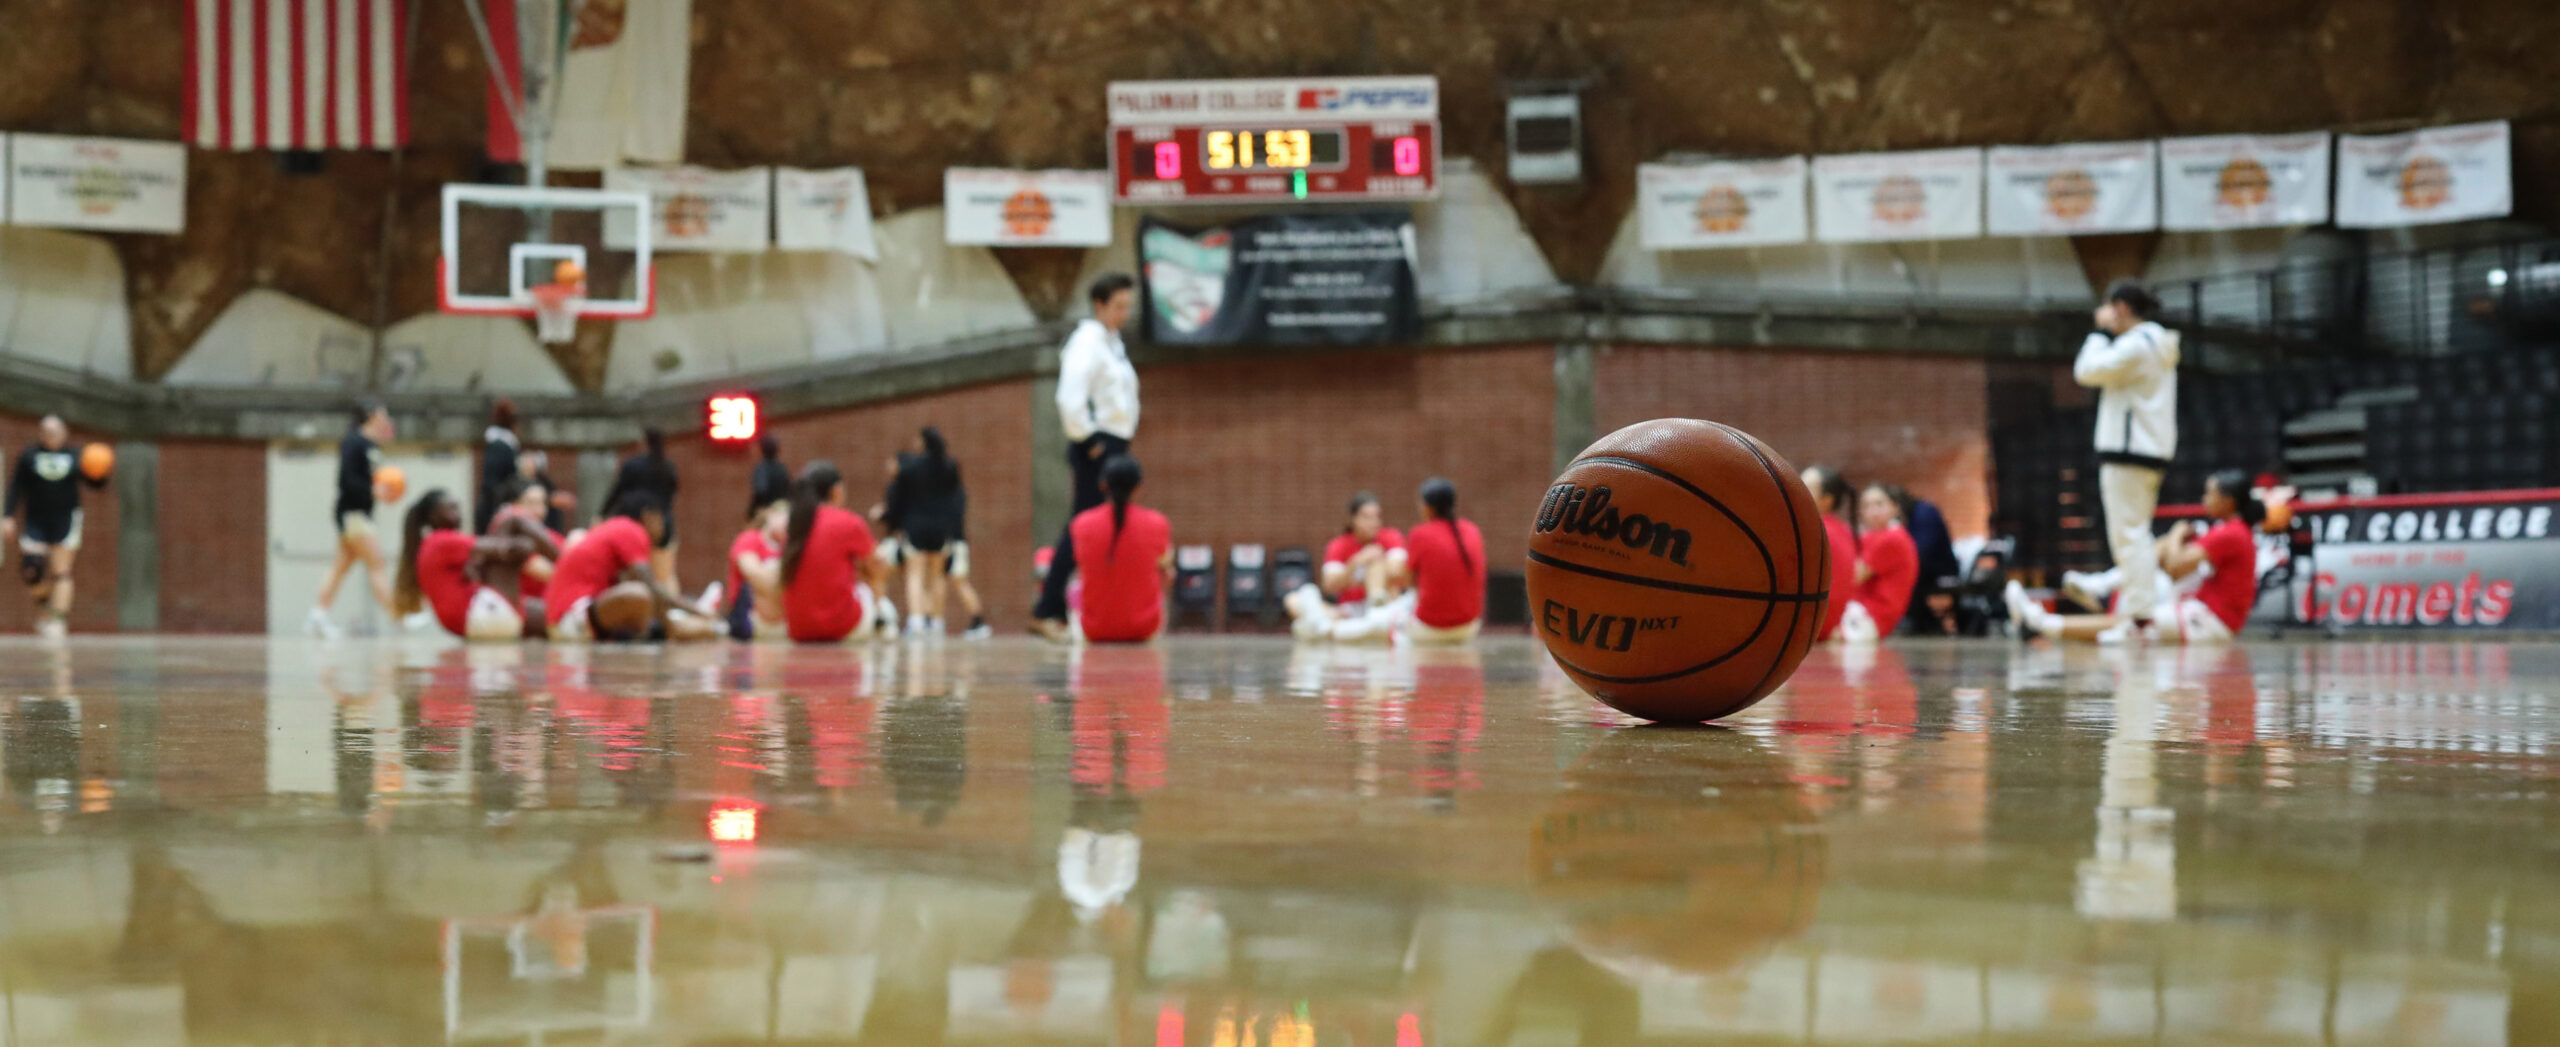 A basketball stands at a basketball court at Palomar College's Dome with the women's basketball team sit on the floor in a circle while listening to their coach.